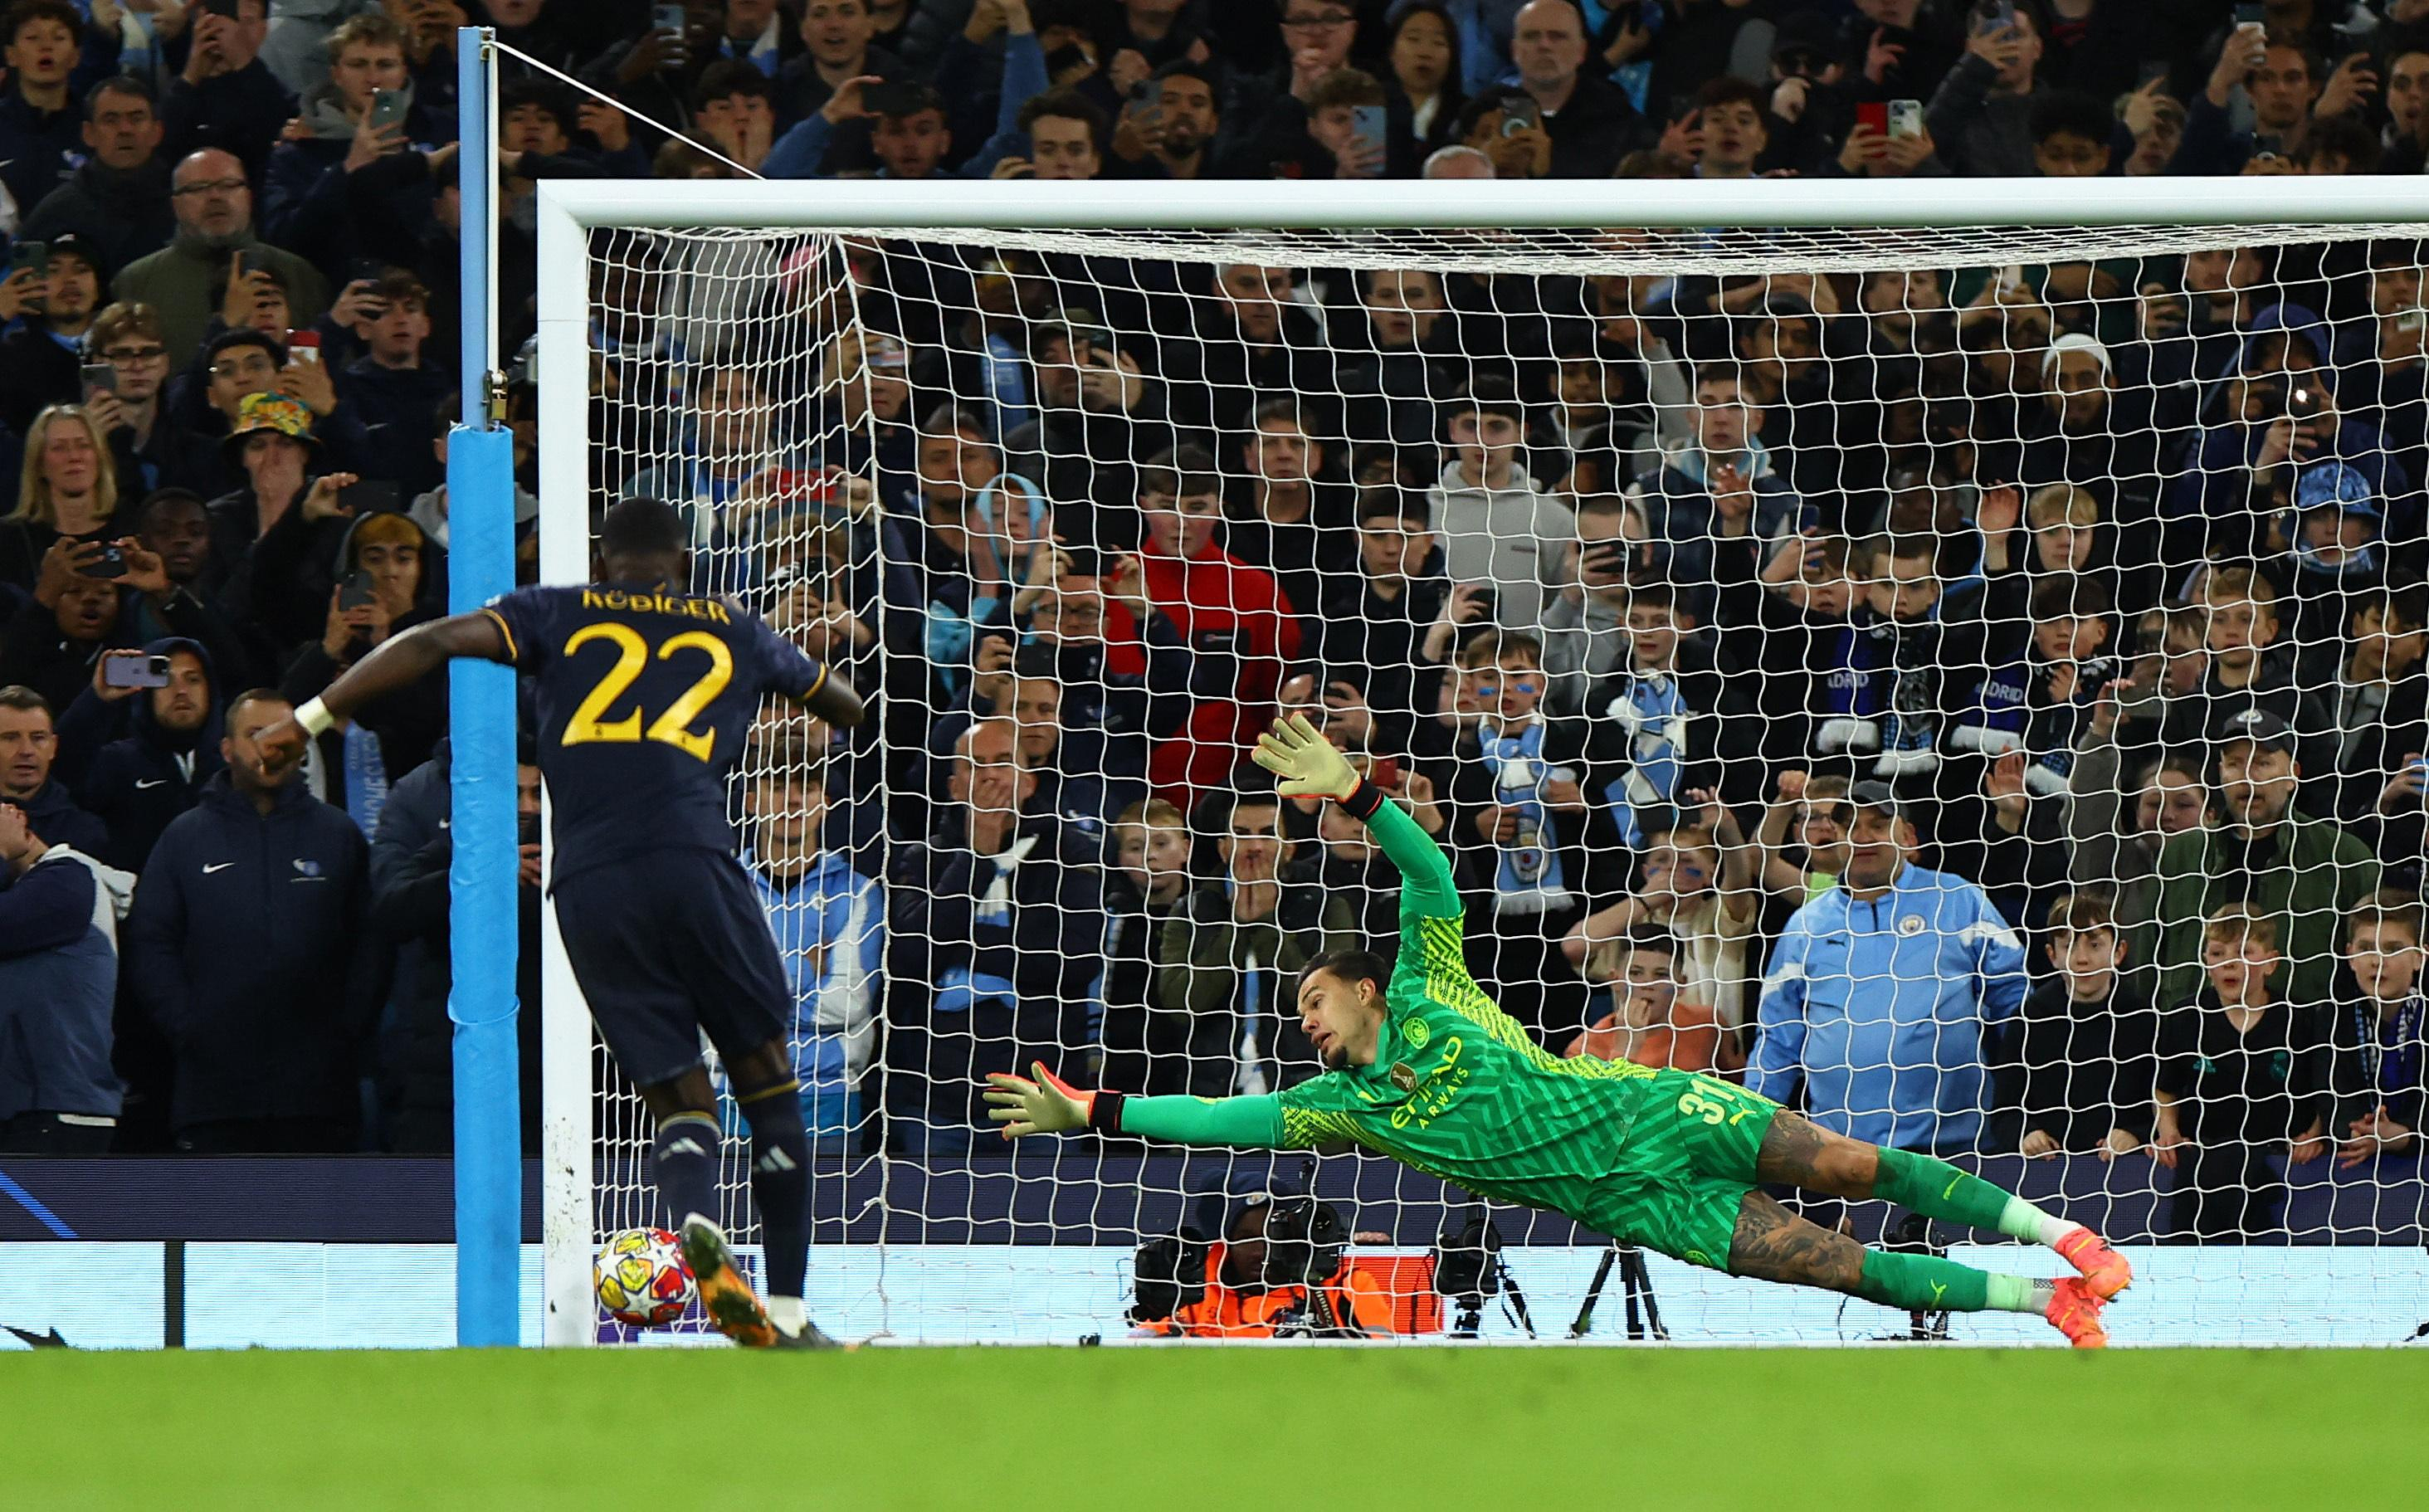 Champions League: video summary of the Manchester City-Real Madrid clash